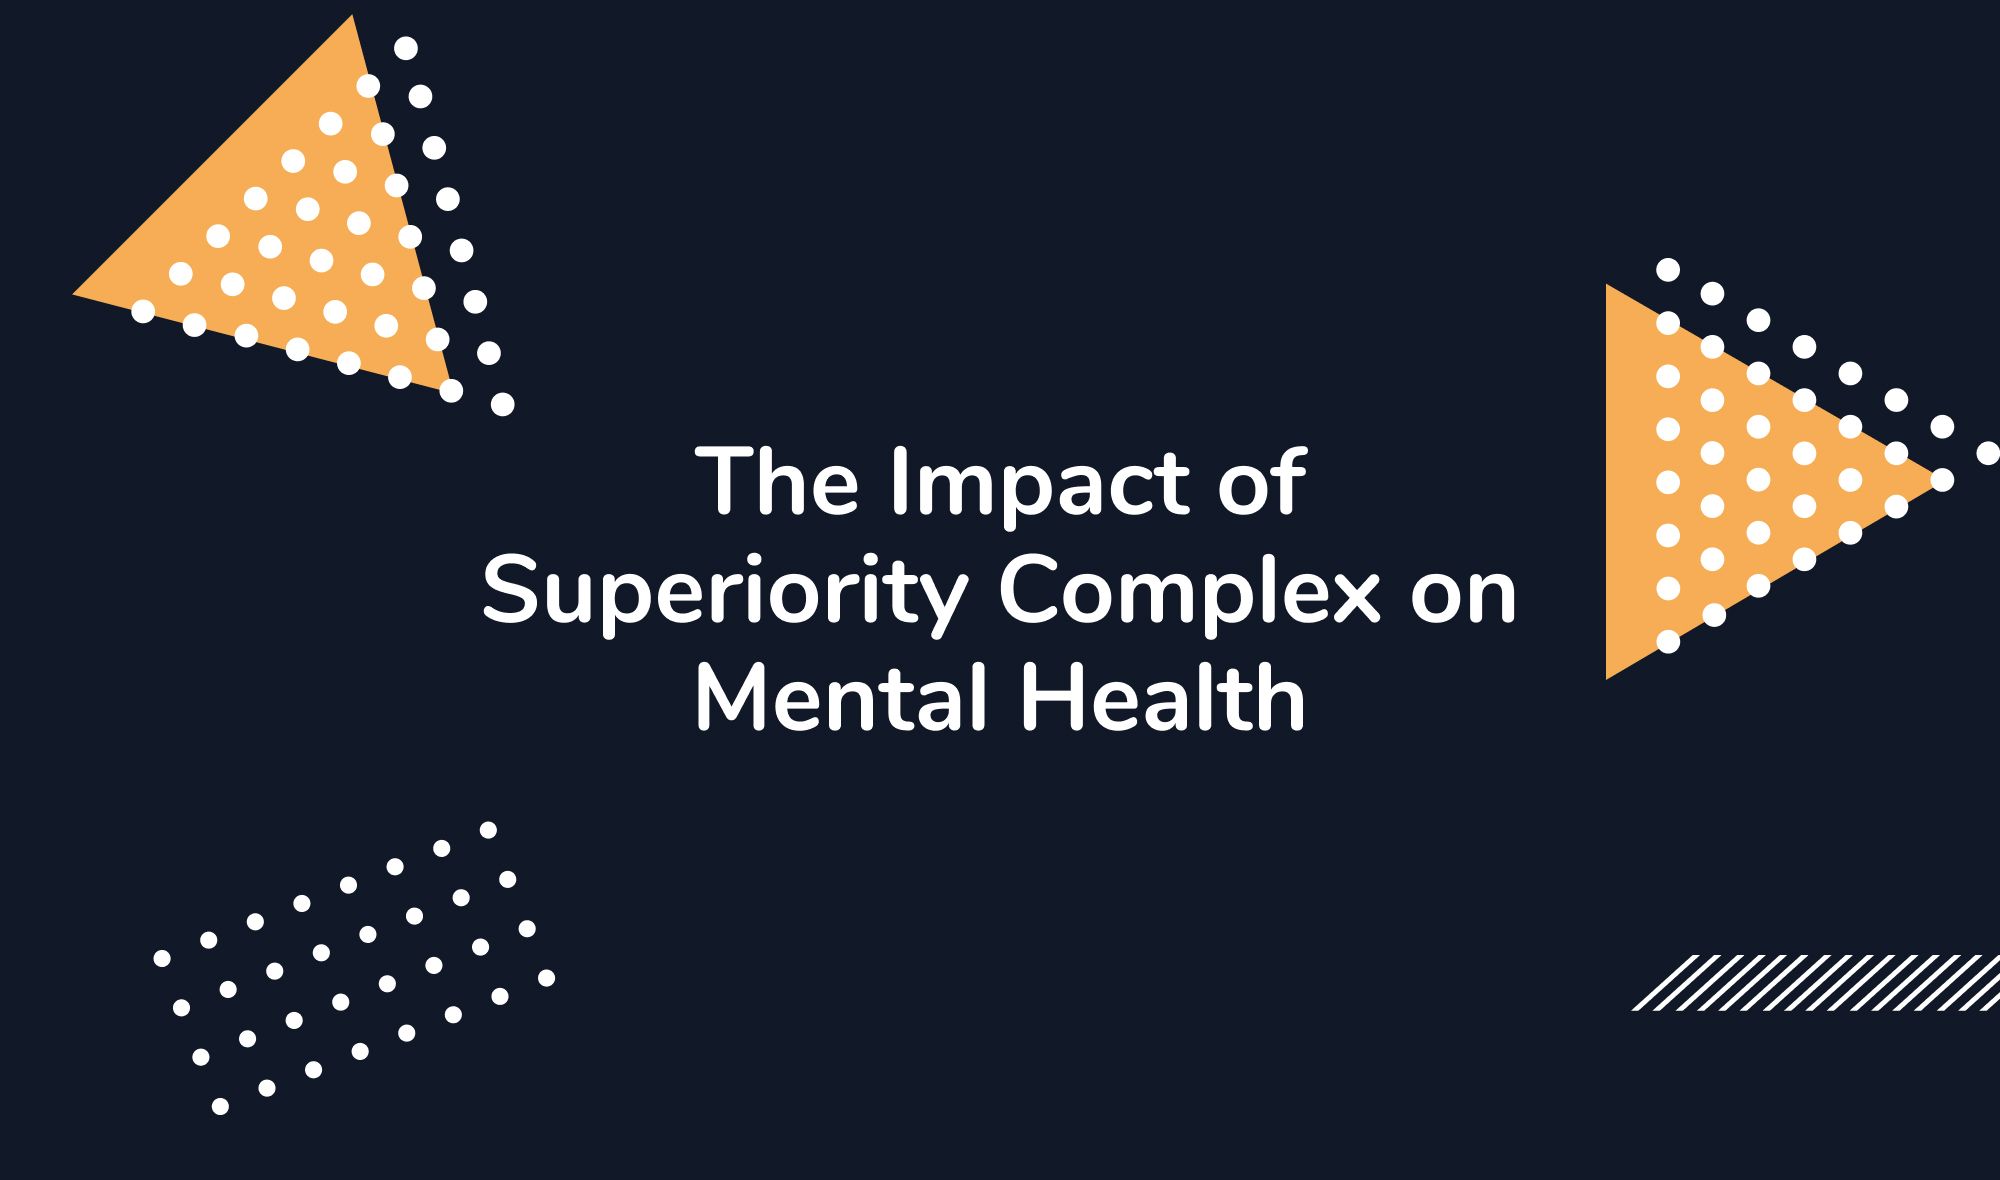 The Impact of Superiority Complex on Mental Health